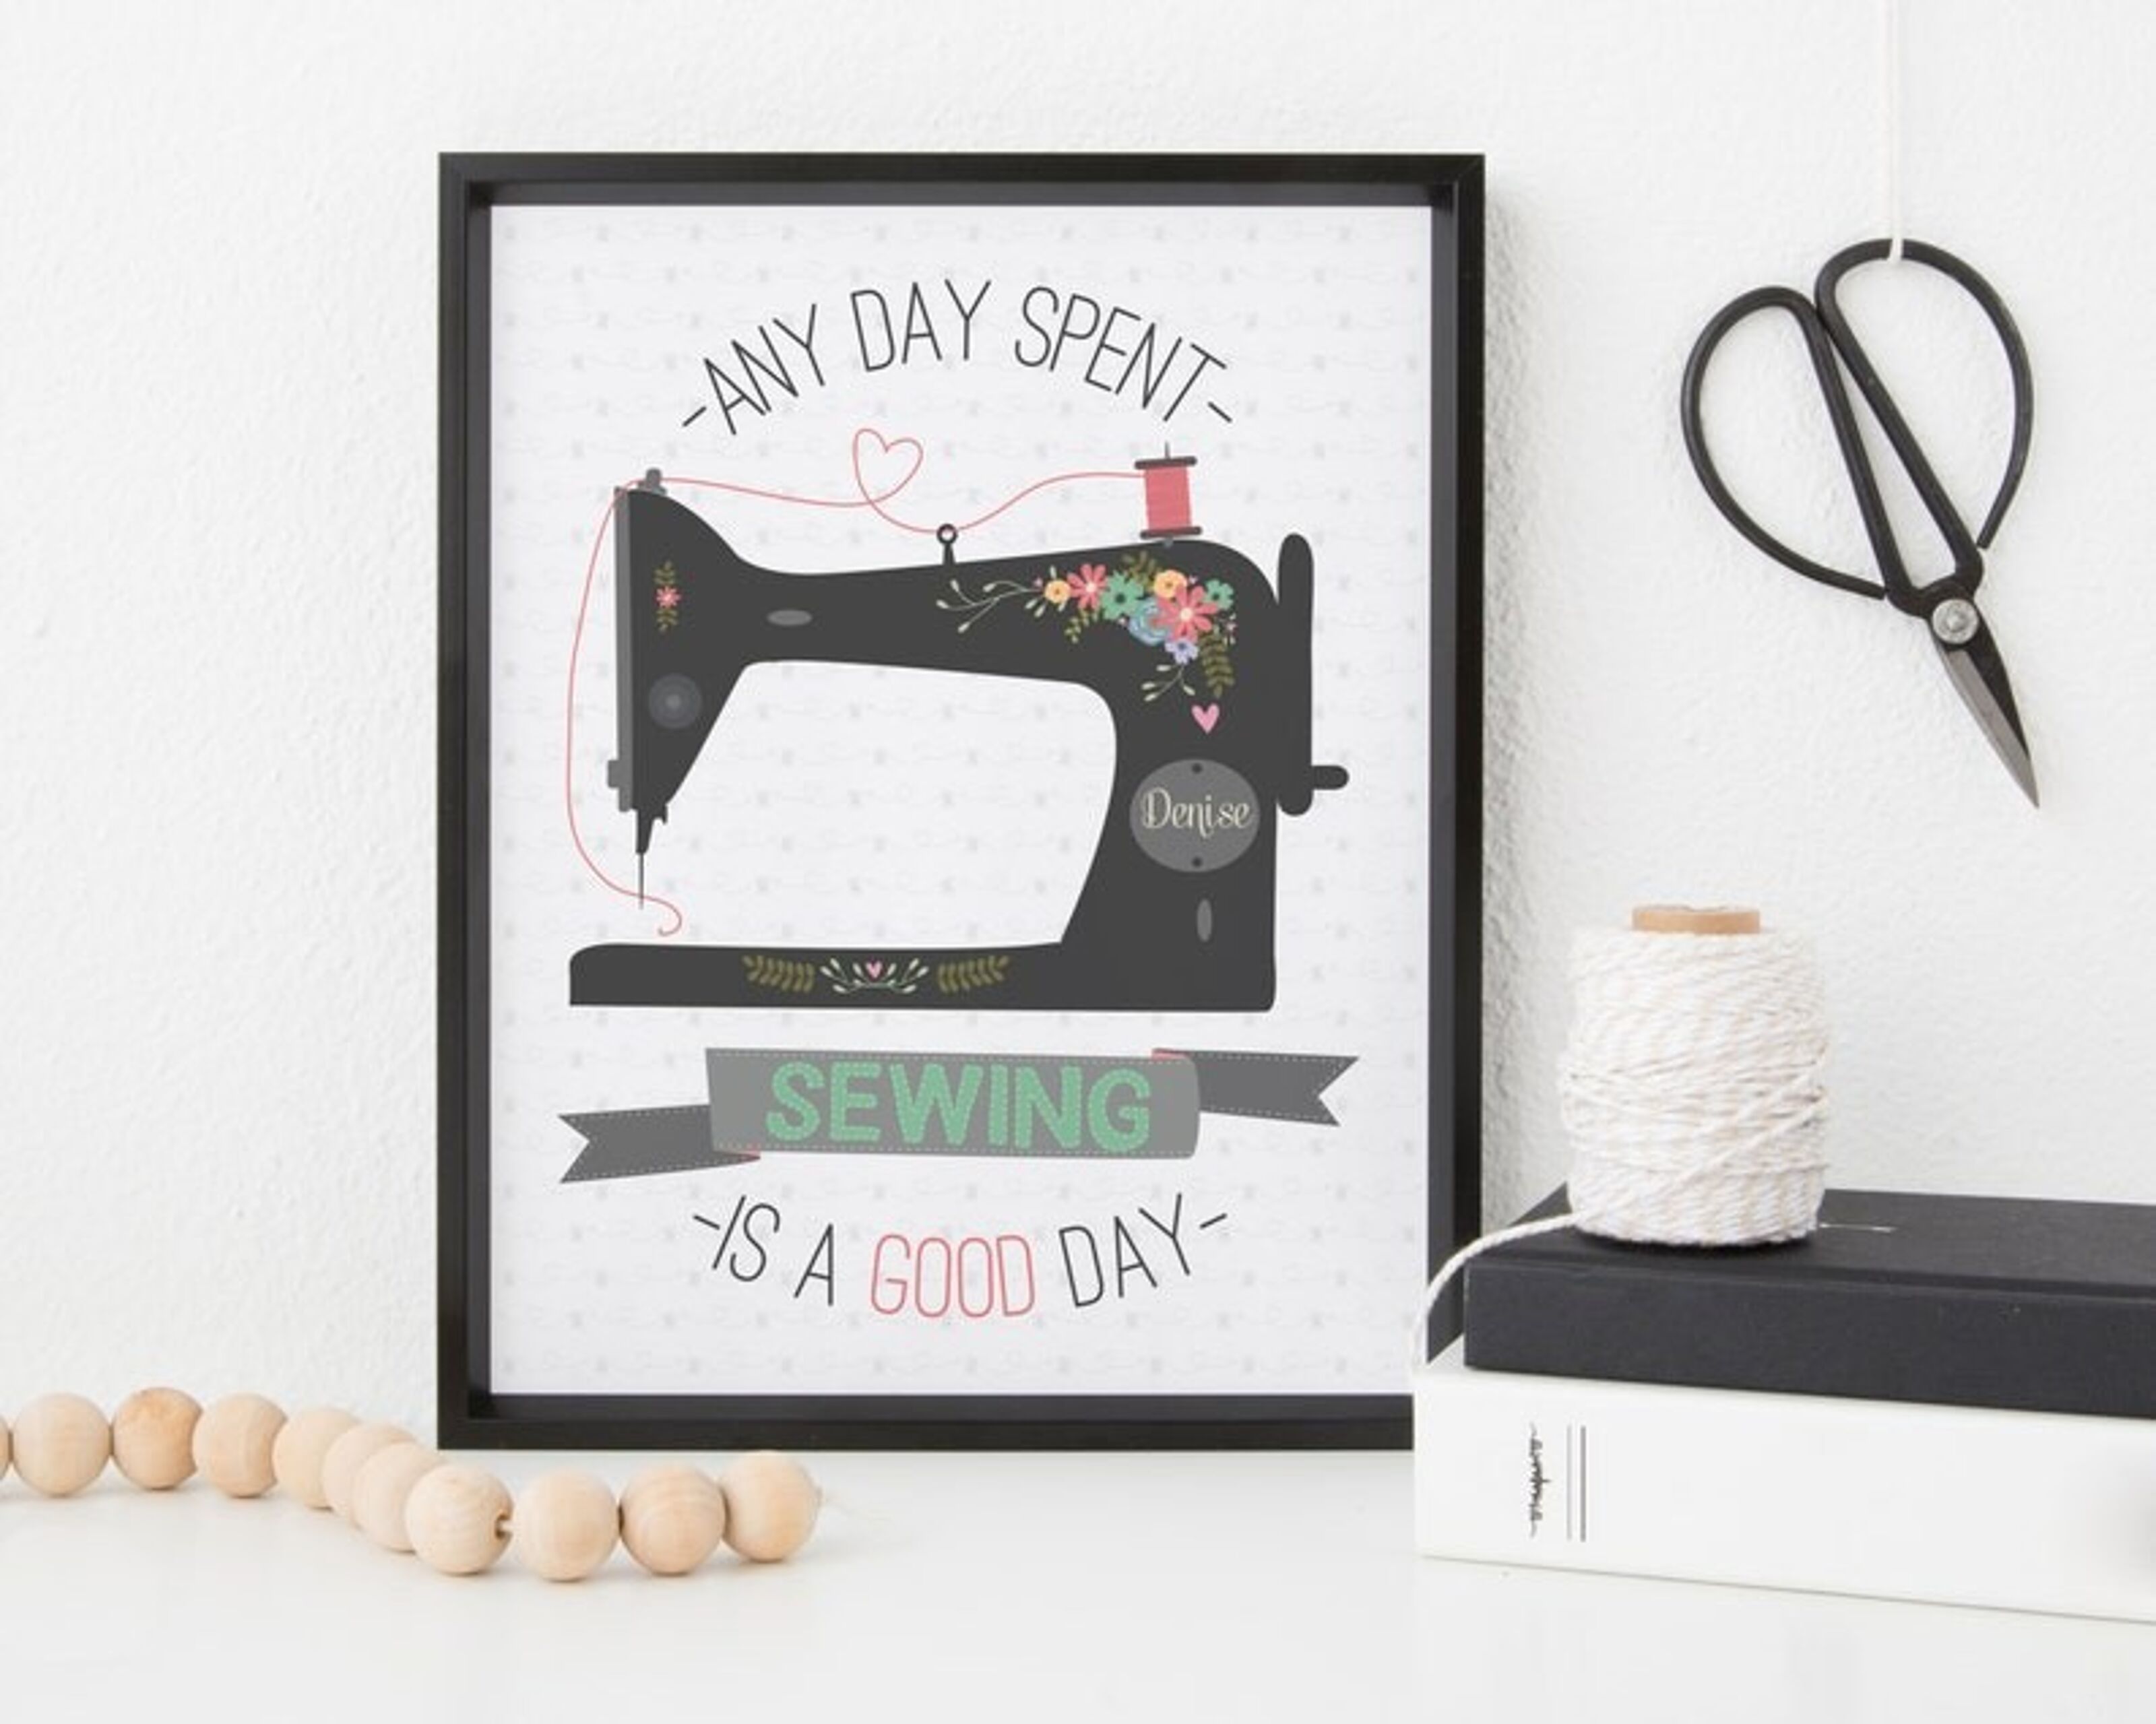 Quilting Sewing Machine Stitch by Stitch Vinyl Record Wall Clock Surprise Ideas Best Friends Birthdays Art Home Room Decor Gift for Birthday Holiday